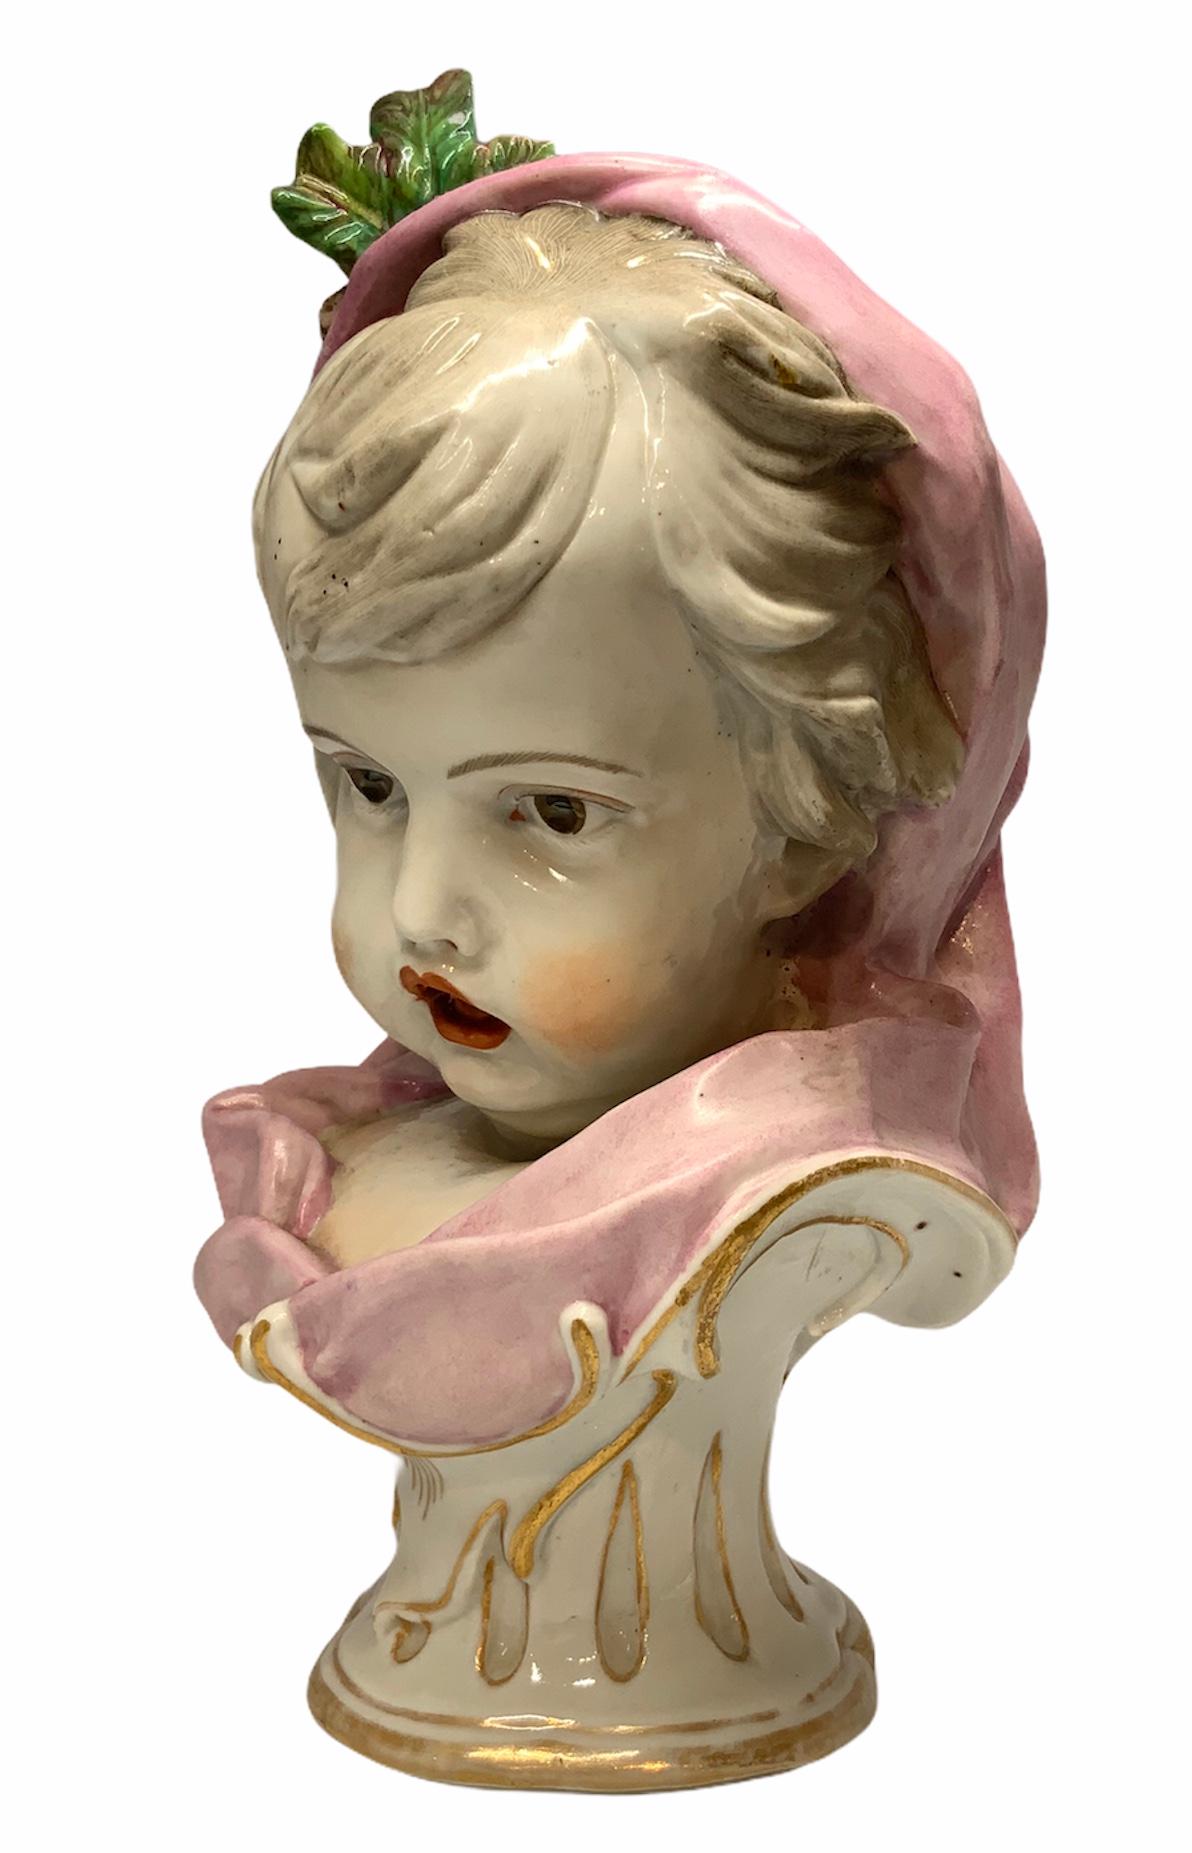 Depicting a bust of a baby girl whose ash hair head and upper chest is covered by a pink waved cape. This is adorned with pine nuts and small pine branches in the top of the head. She has deep brown eyes, red lips, and prominent cheek bones. It